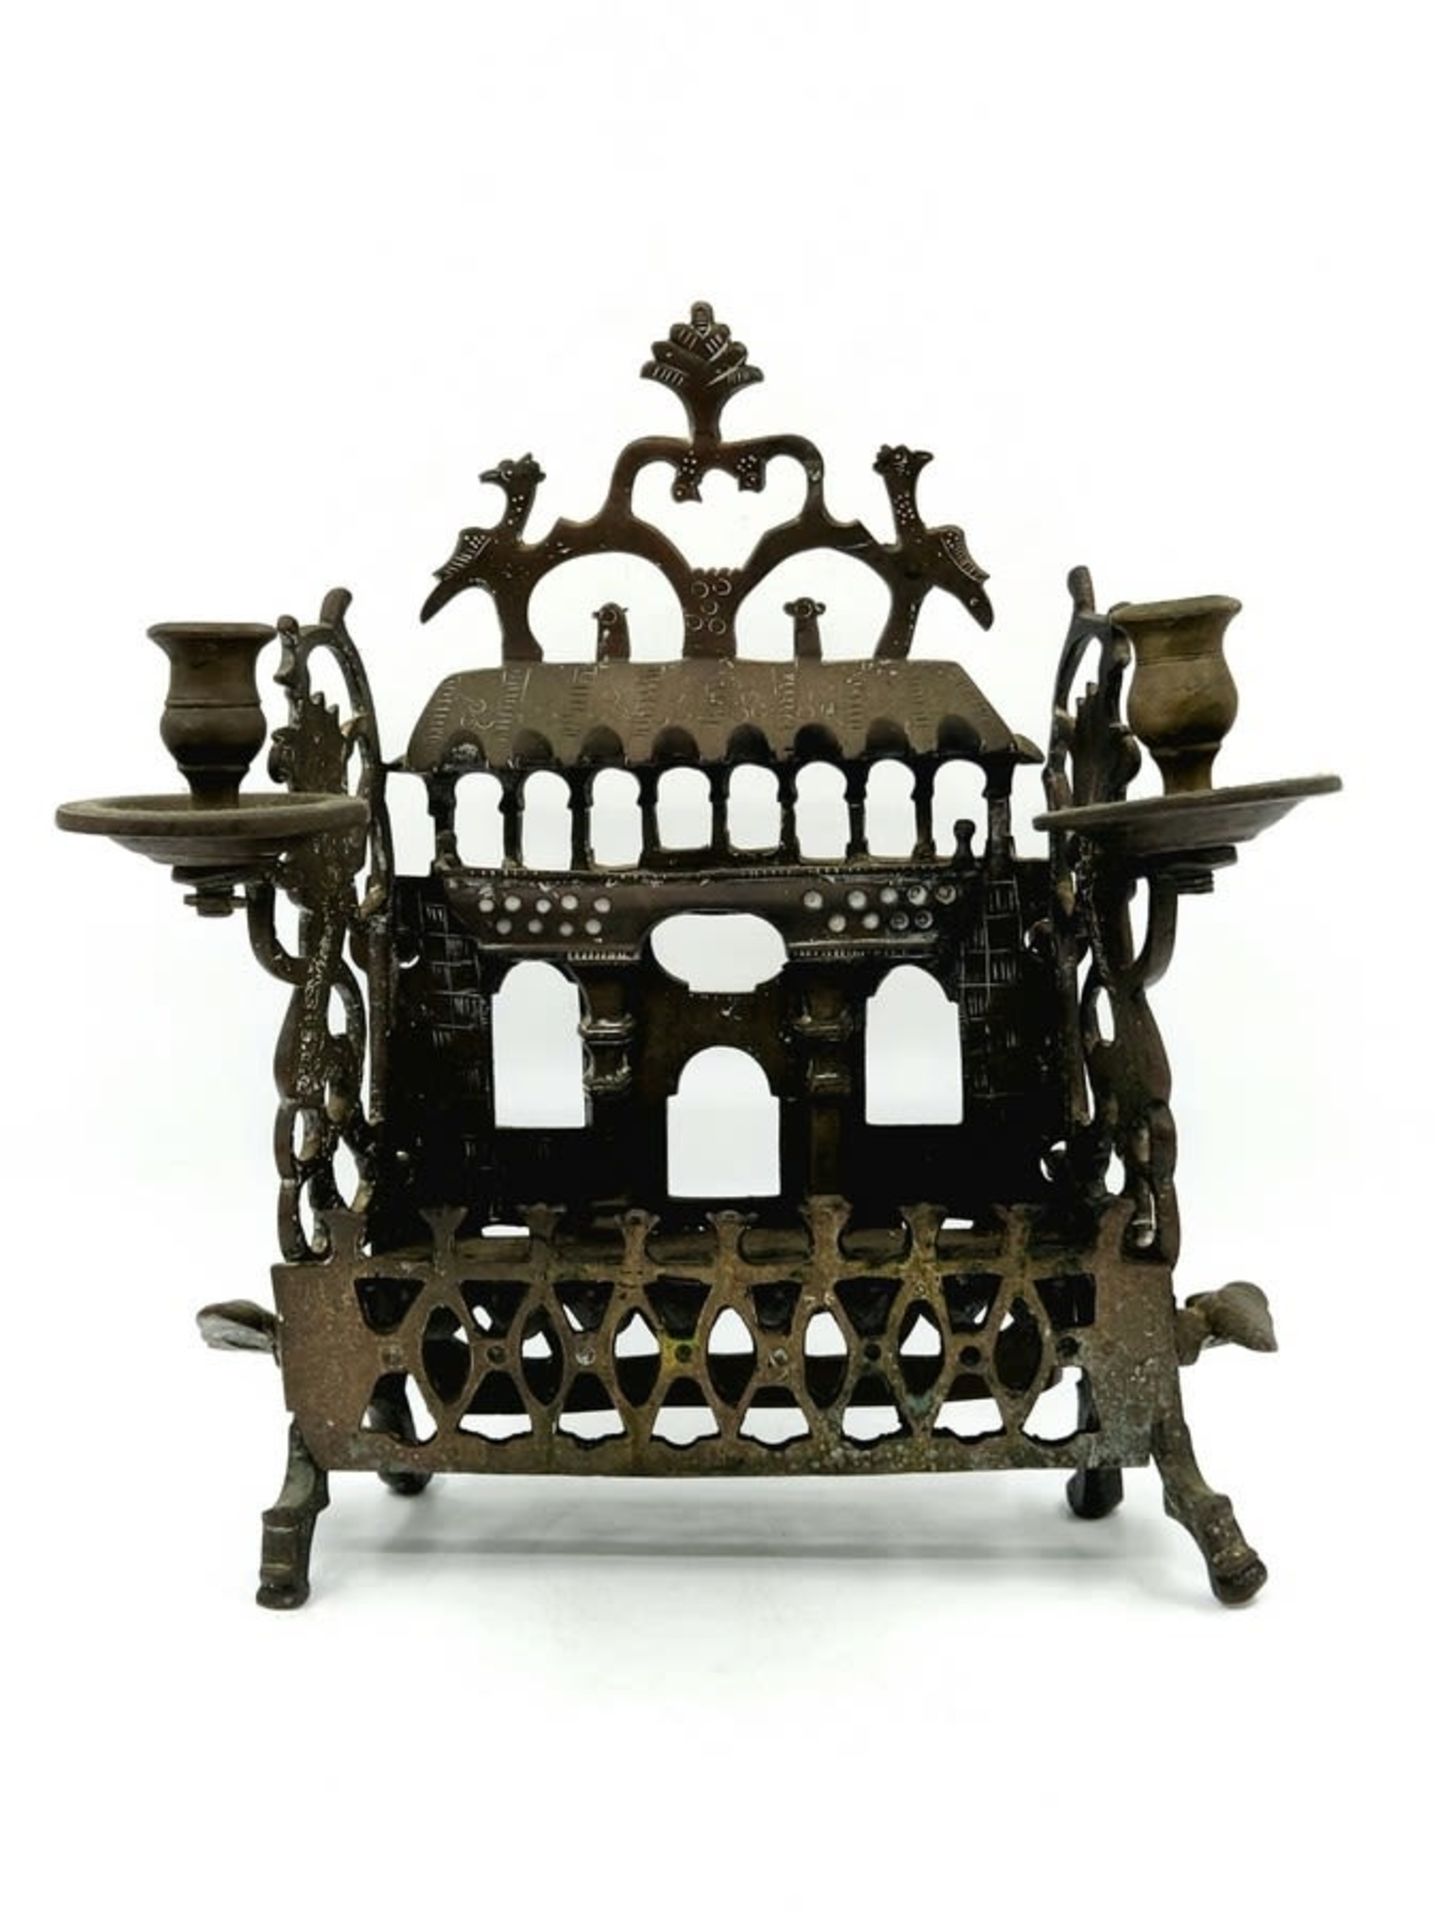 An antique menorah, 18th century, Eastern Europe (apparently Poland), made of bronze, the back is